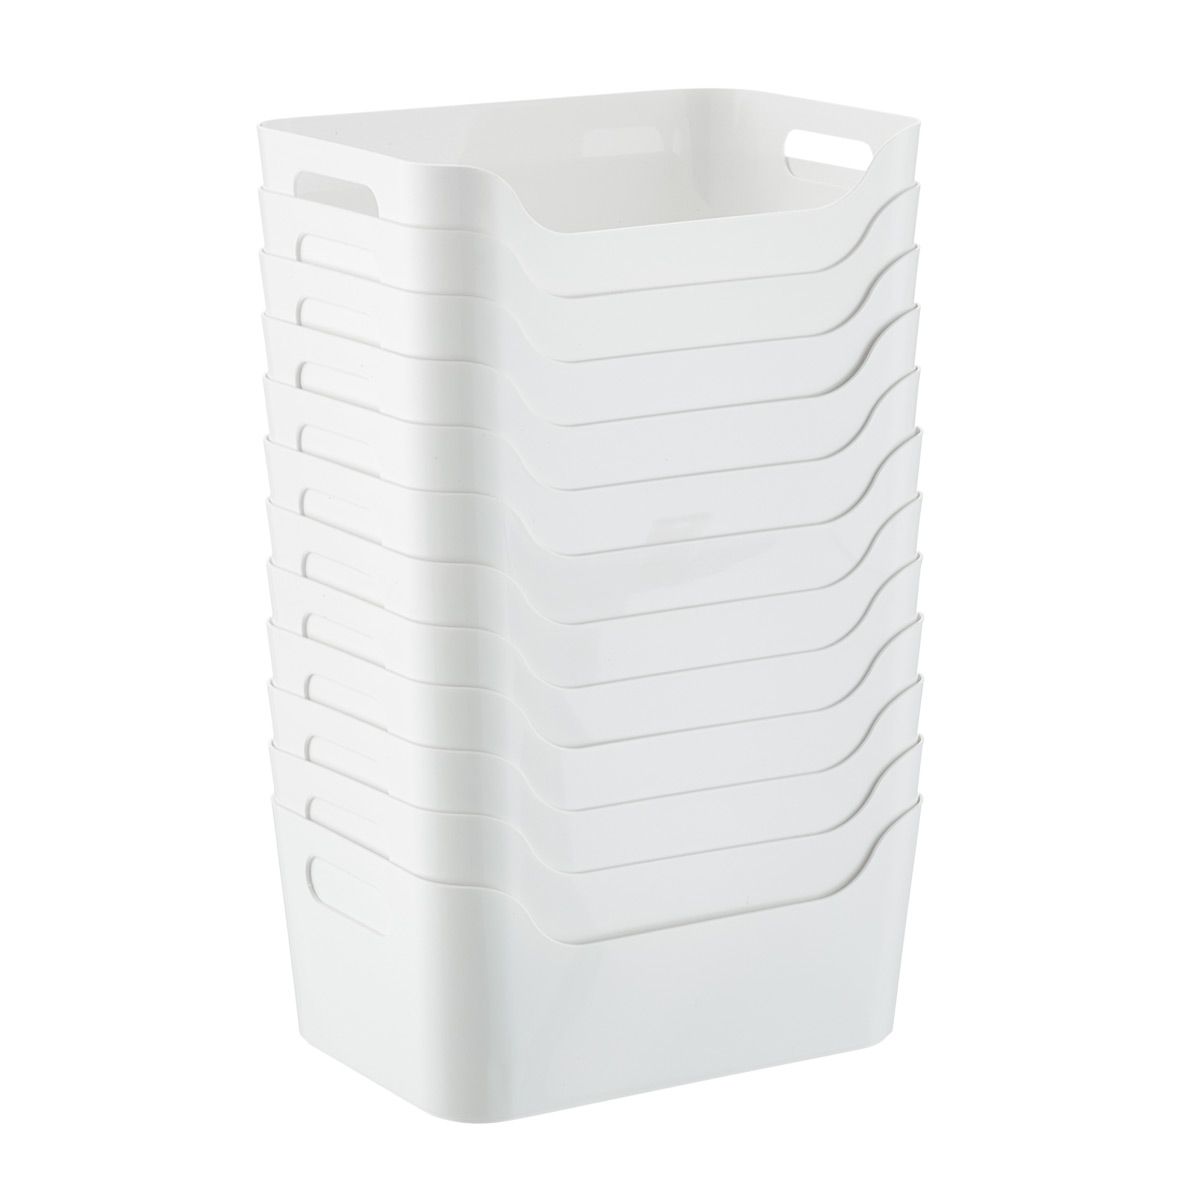 Case of 12 Small Plastic Bins w/ Handles White | The Container Store